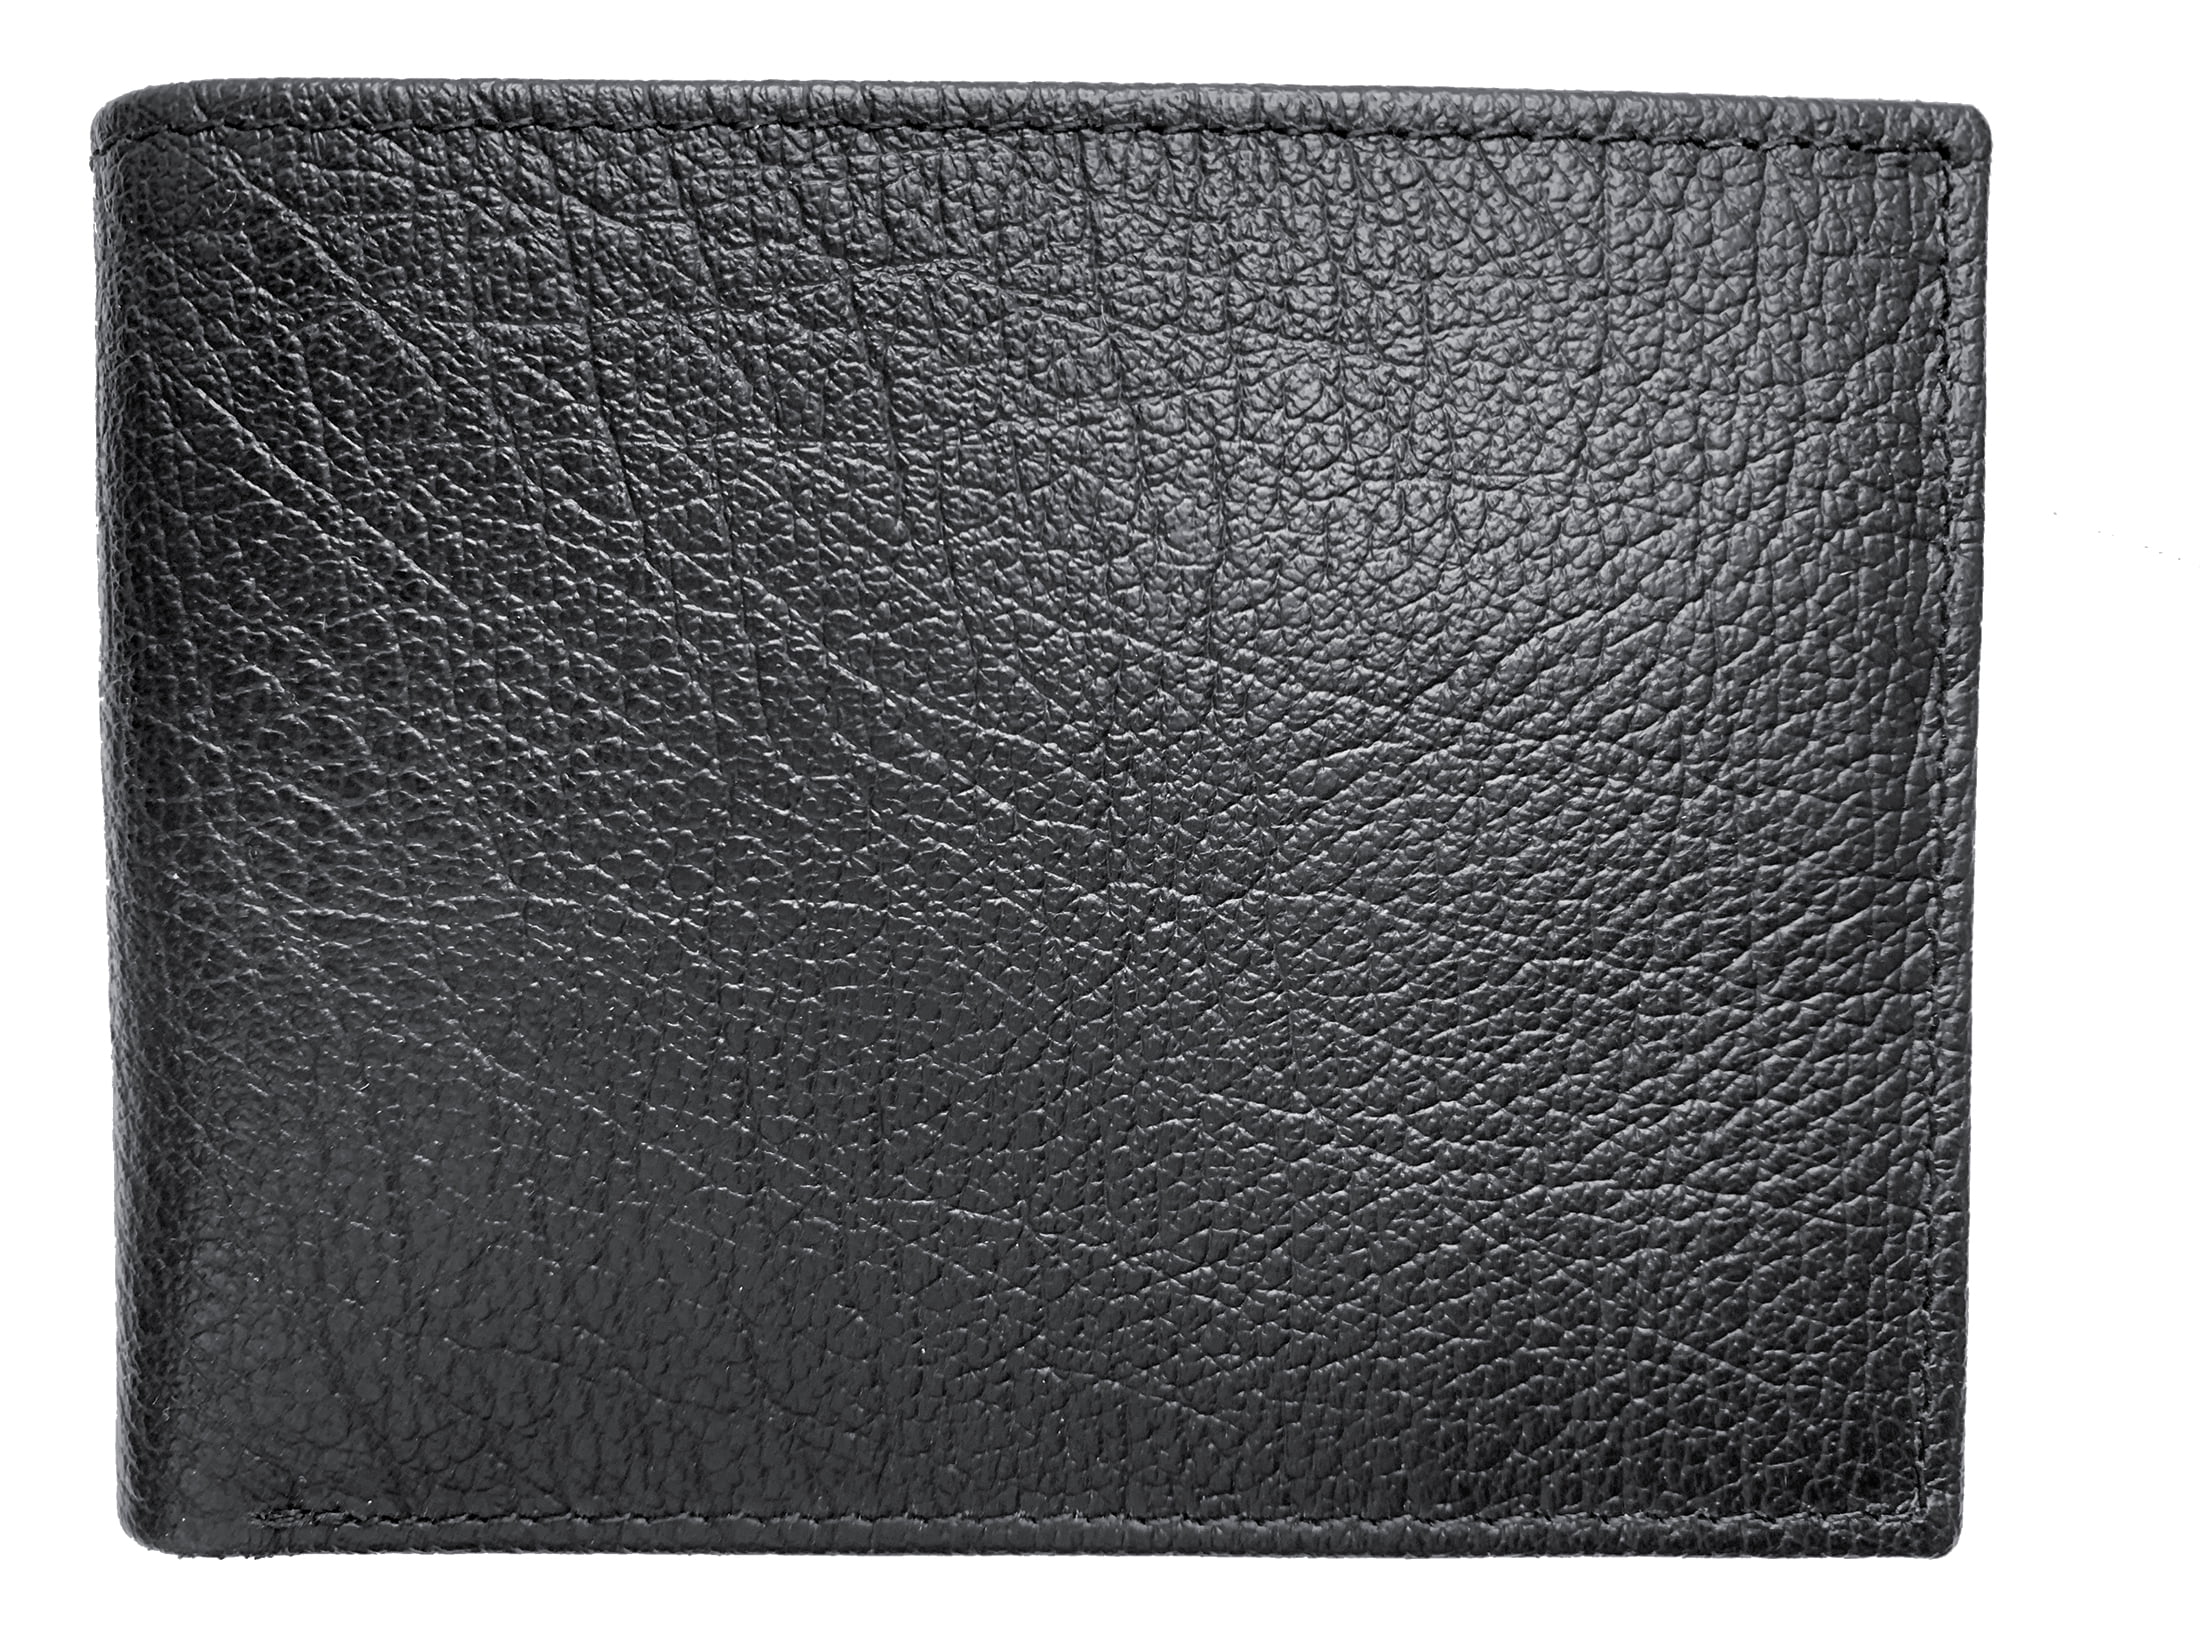 George Men's Genuine American Bison Leather Bifold Wallet With Wing Ranger Black, Men ages 16 to 99, Natural Medium Leather-Grain Texture